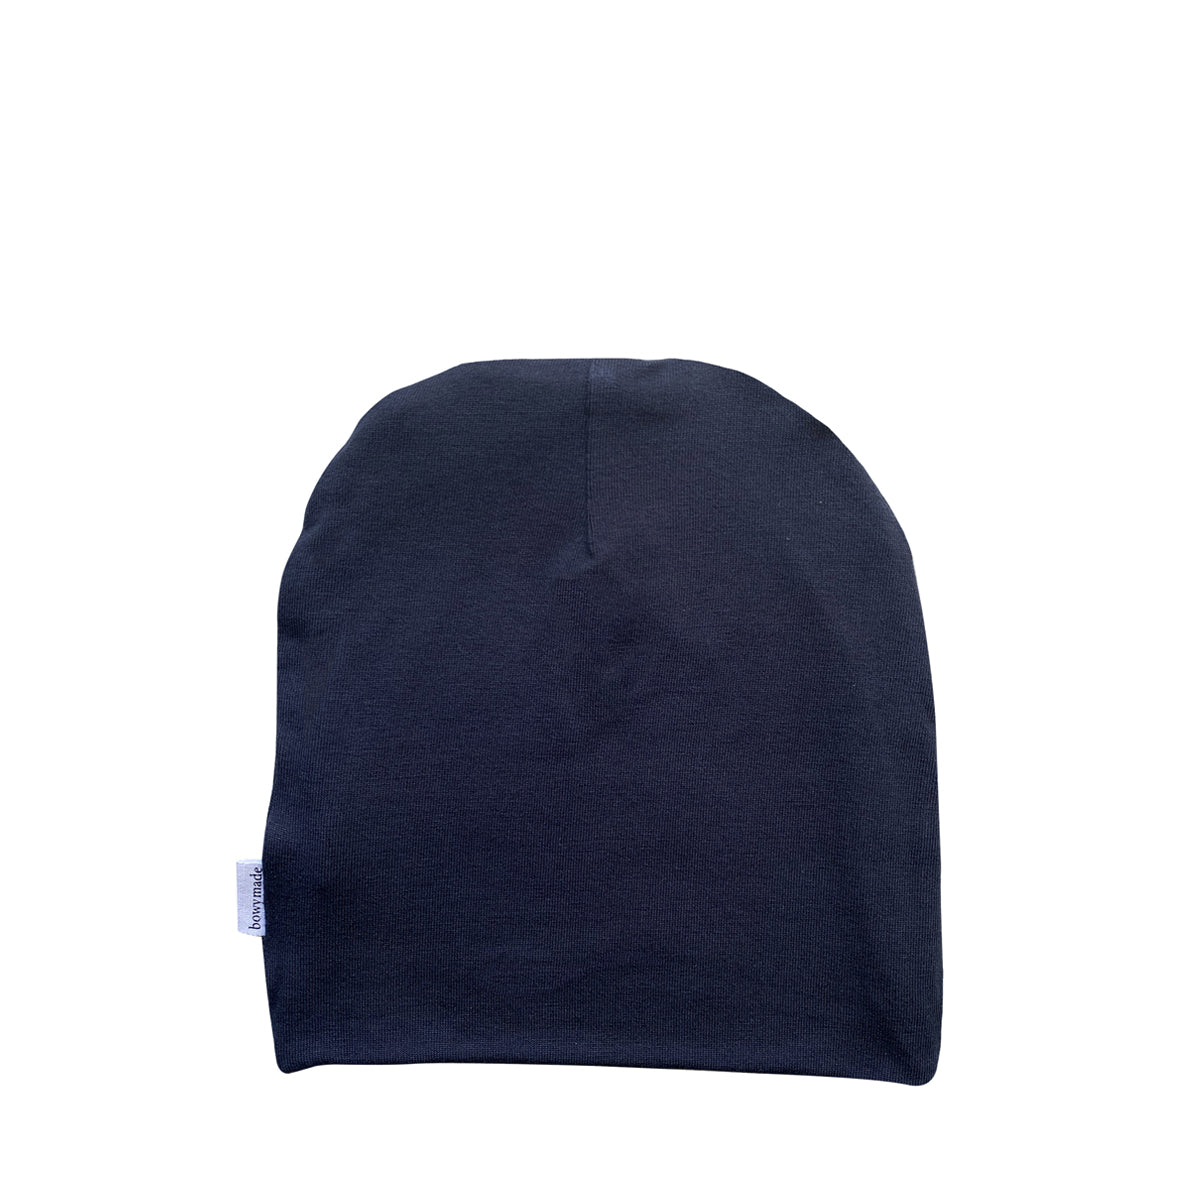 Bowy Made Slouch Beanie - Navy